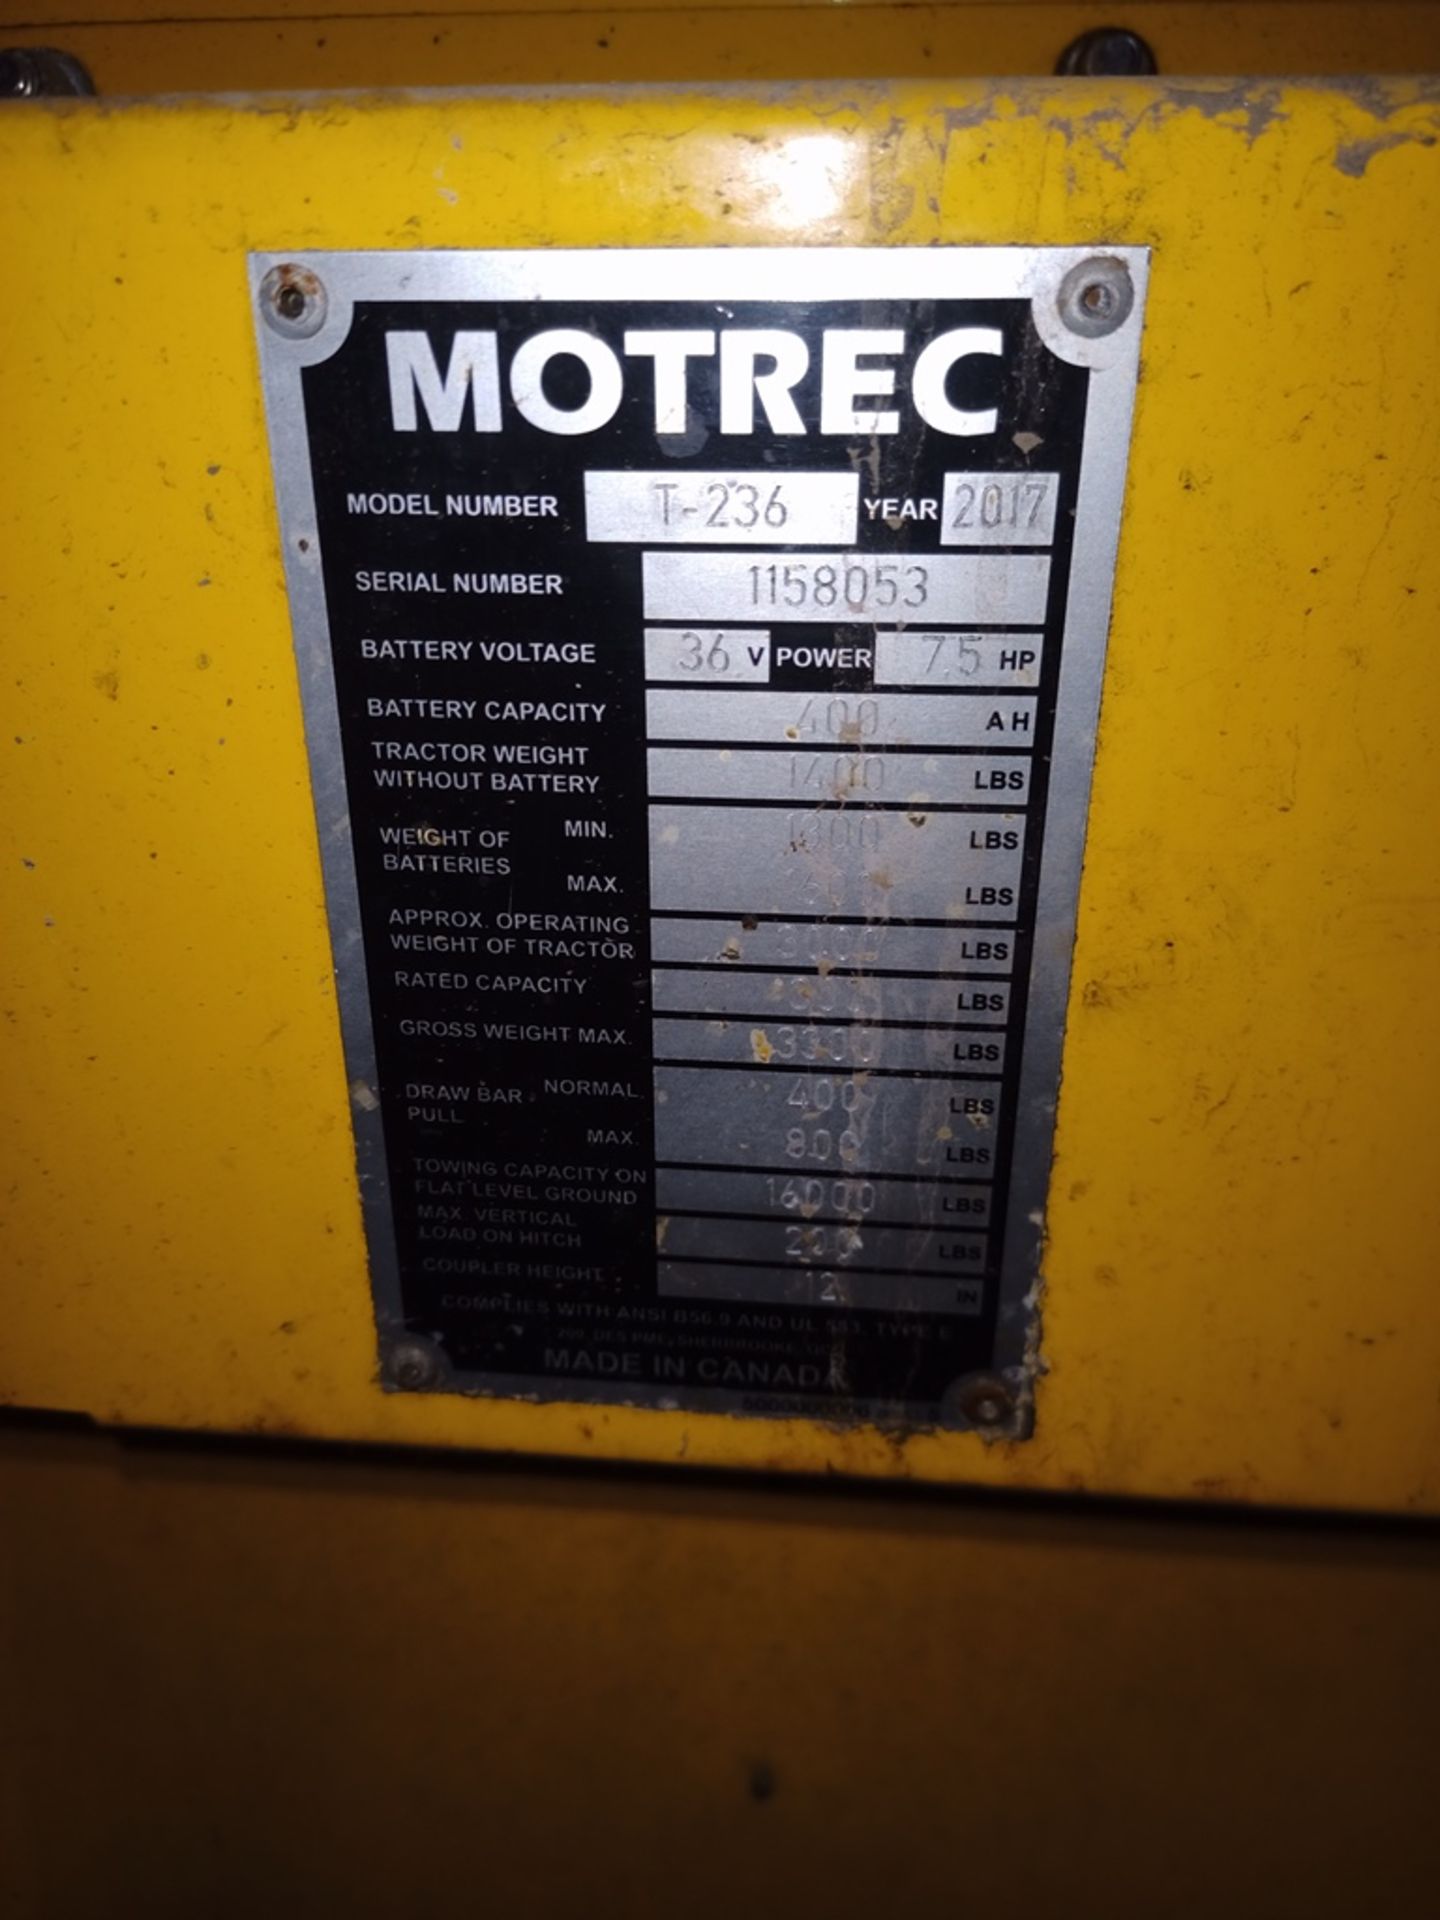 Motrec electric Tow tractor, Model MT-236, S/N 1158053, Year 2017 - Image 18 of 19